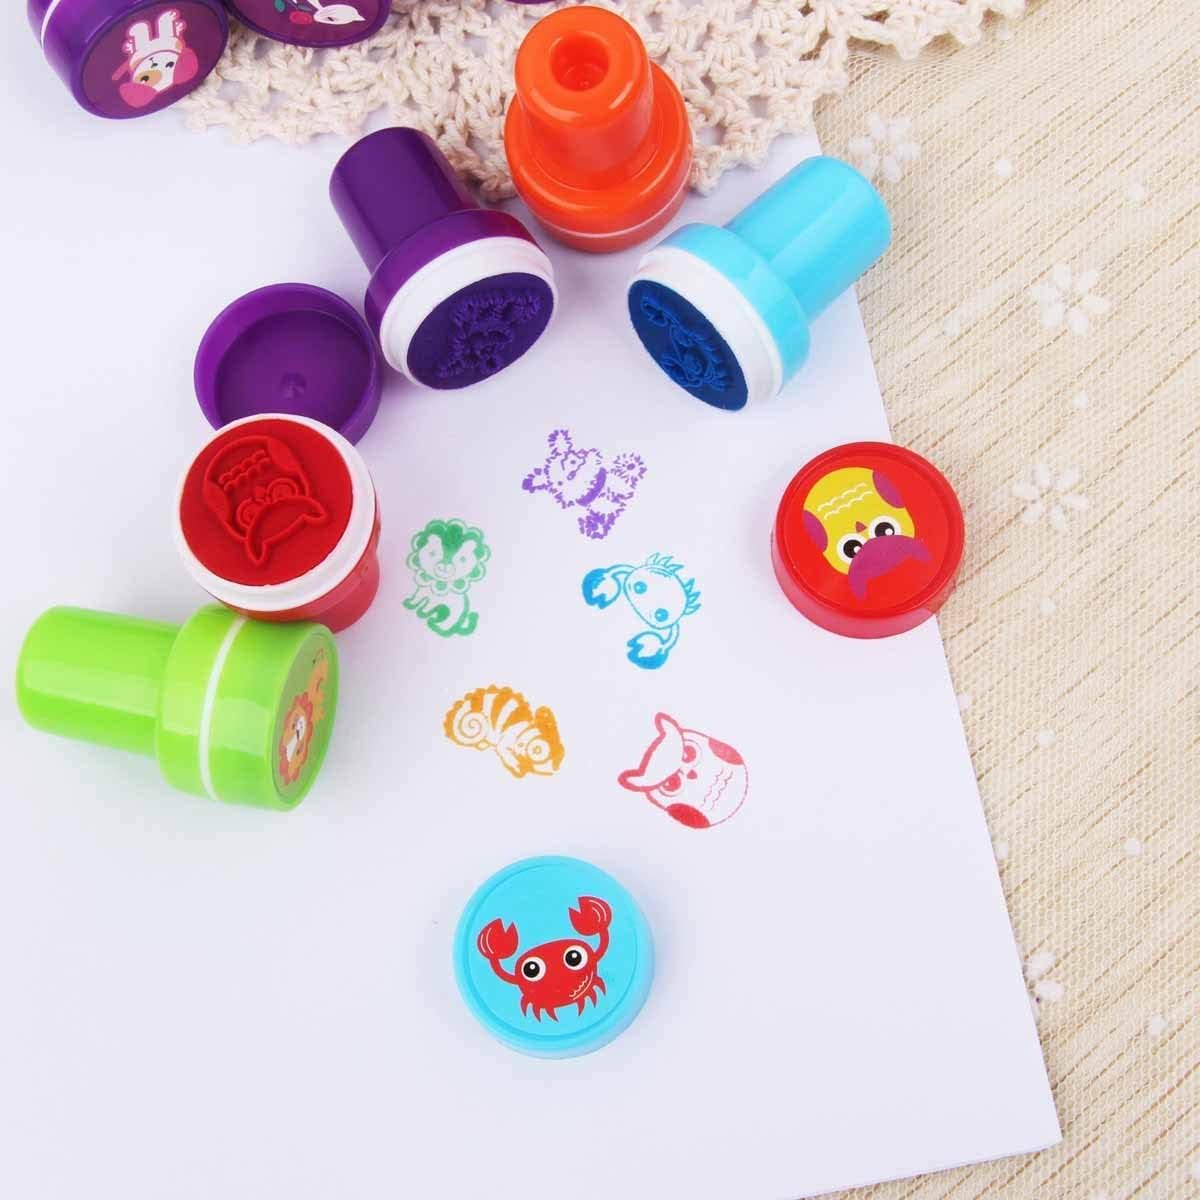 CHANEDE Alphabet Stamps for Kids,26 Pieces Self-Ink Washable Stampers Toys for Children Crafts Party Favor,School Prizes,Birthday Gift,Learn Props (26 Pieces Animals Stampes New)